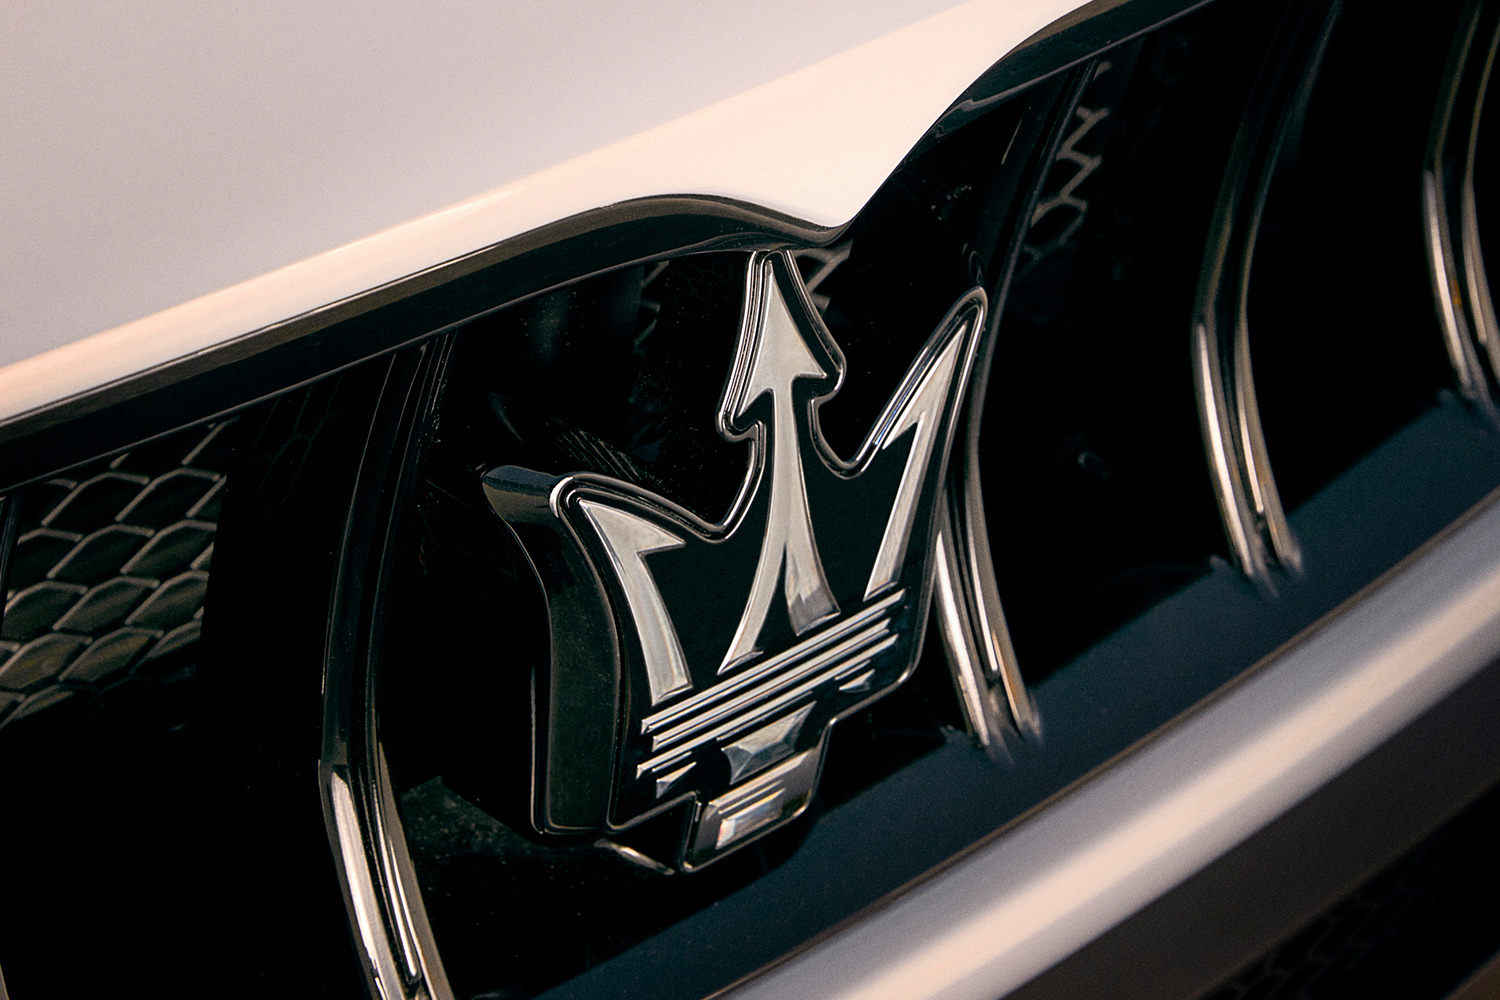 What Is the Maserati Logo Supposed to Be